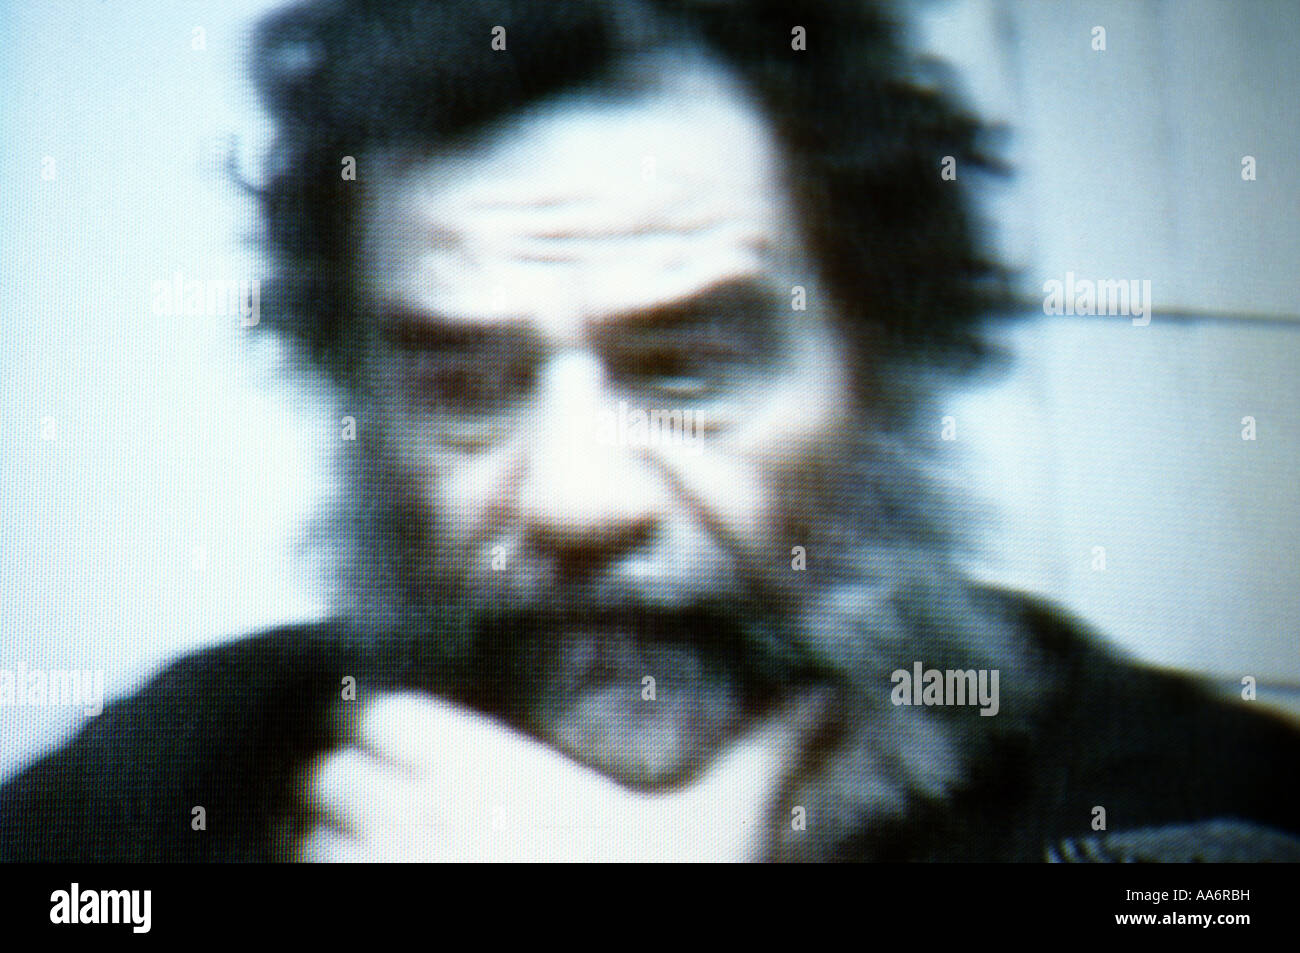 TV screen shot of Sadfam Hussein immediately after he had been captured by American forces. Stock Photo